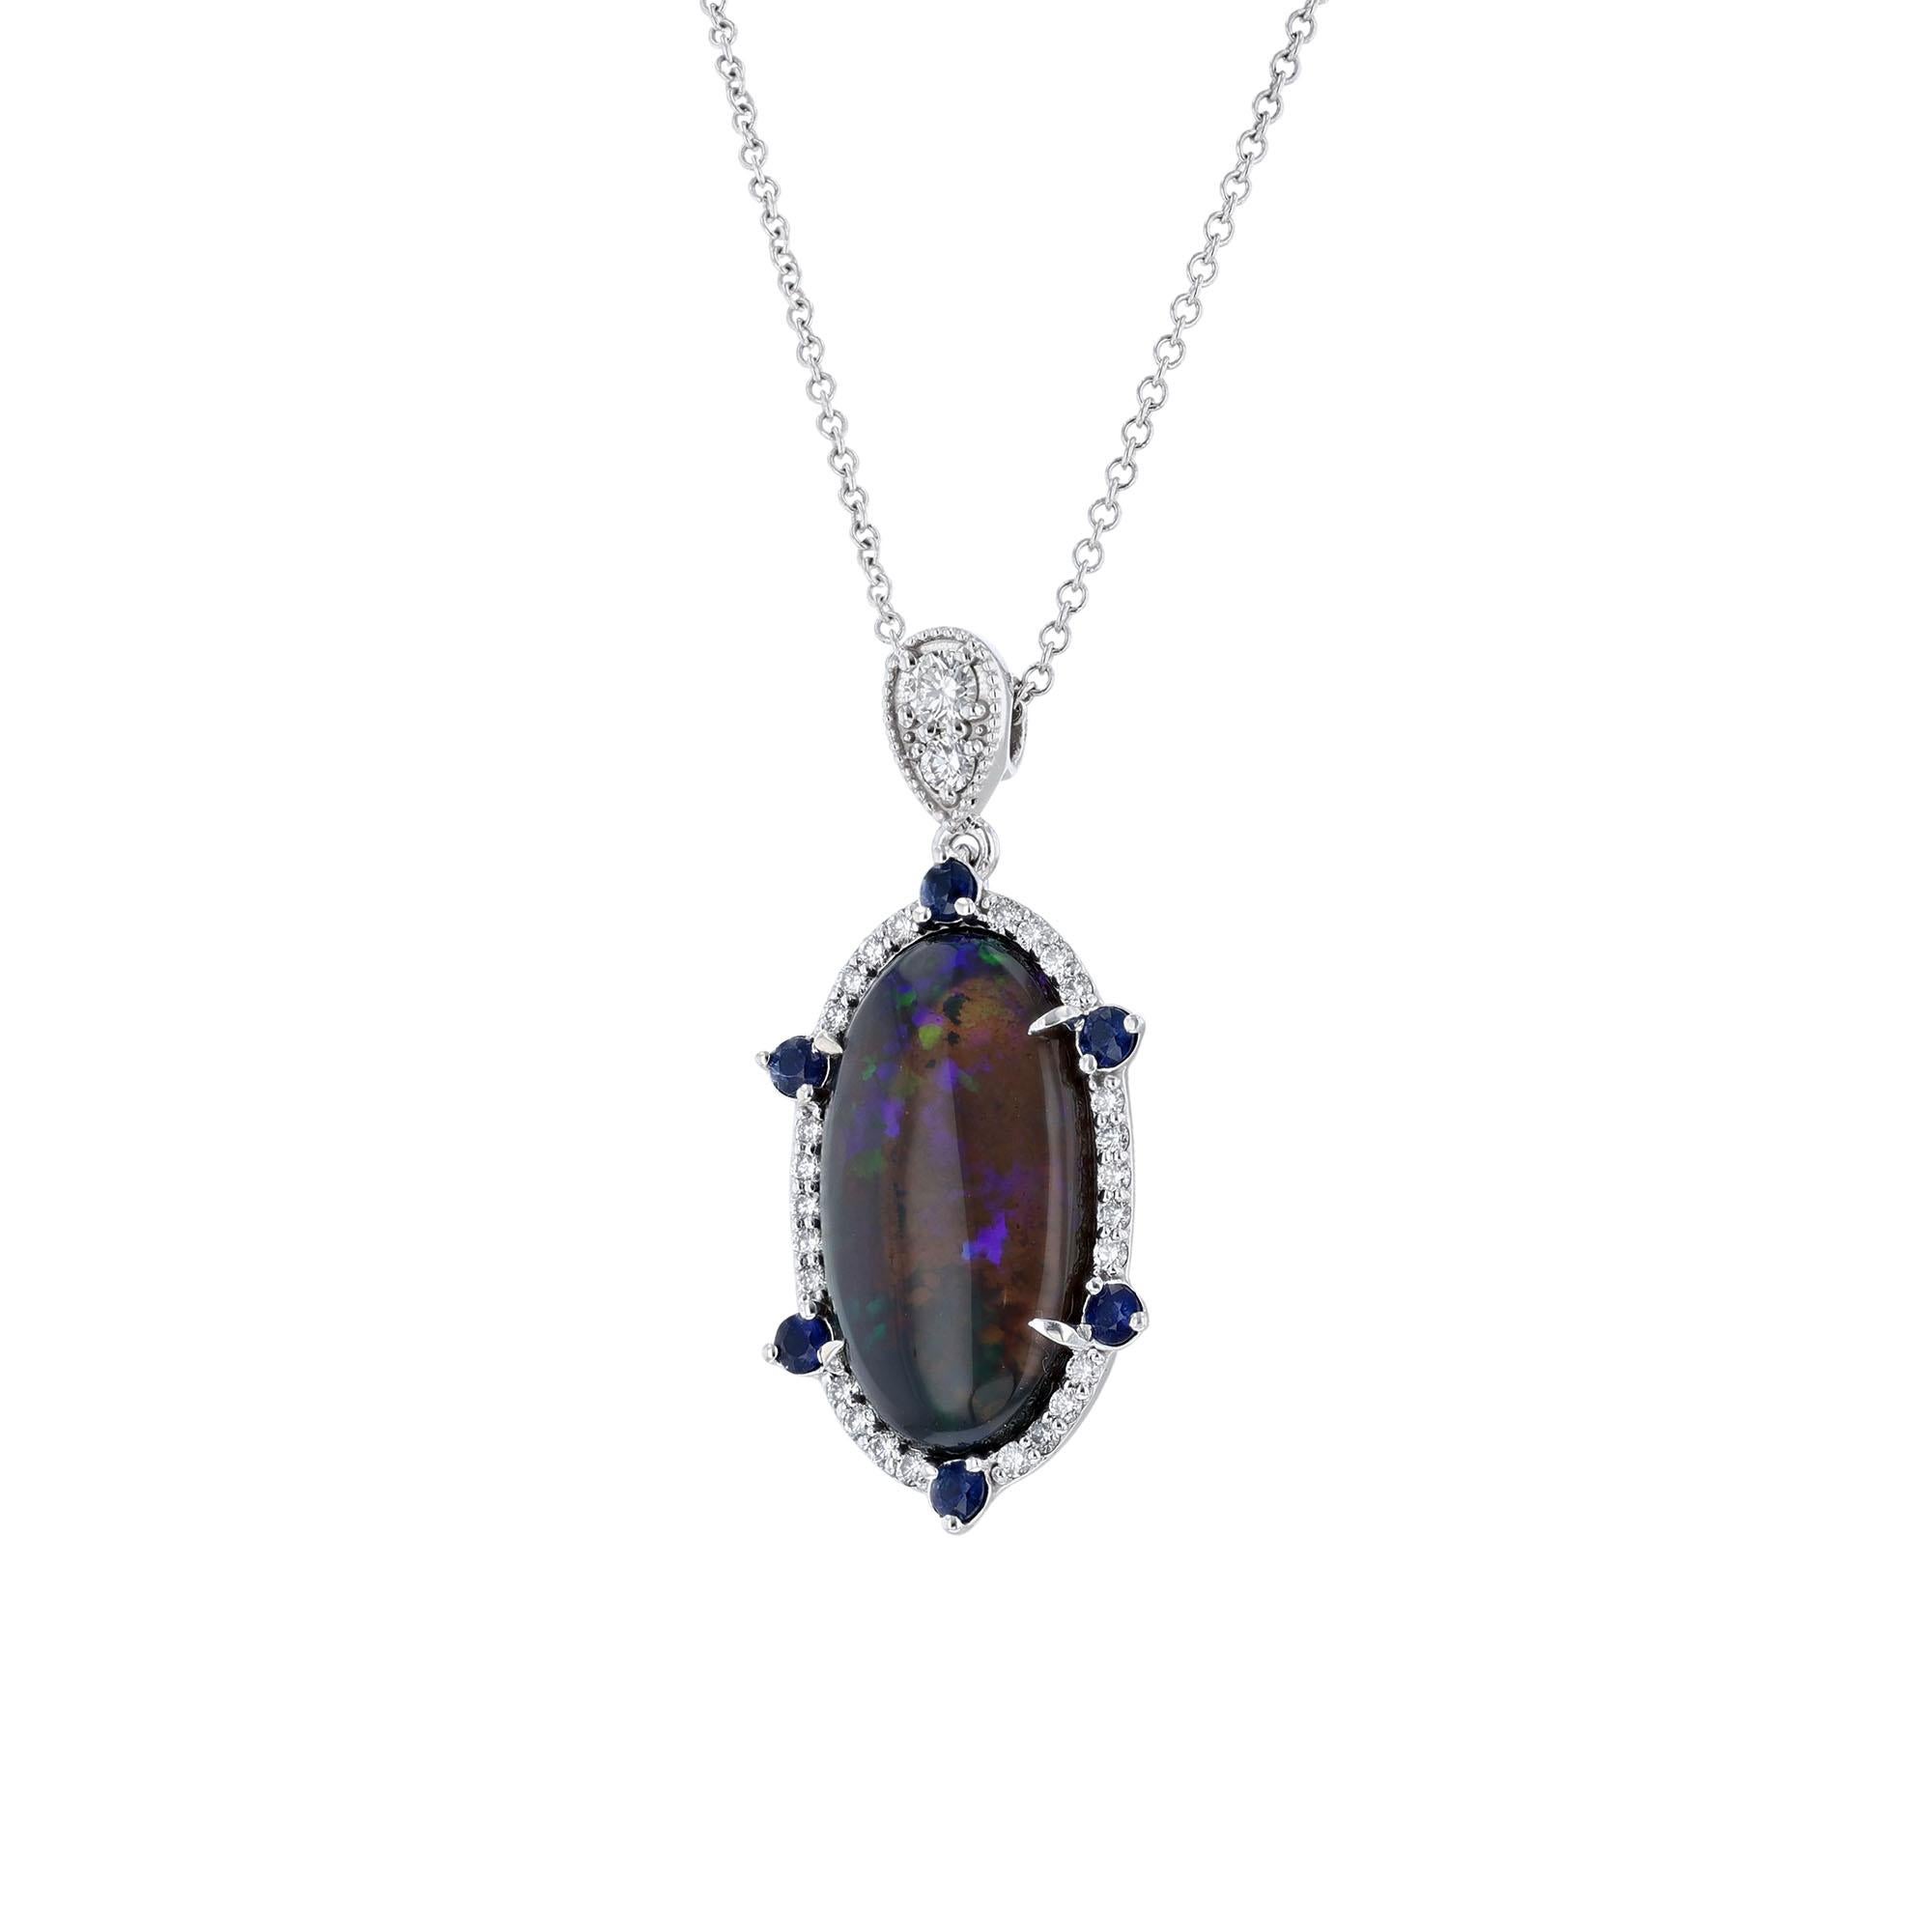 This necklace is made in 14K white gold and features an oval shaped opal weighing 9.20 carats. With a halo and enhancer of 28 diamonds weighing 0.39 carat. Accented with 6 blue sapphires weighing 0.35 carats.  Necklace has a color grade (G) and (H).